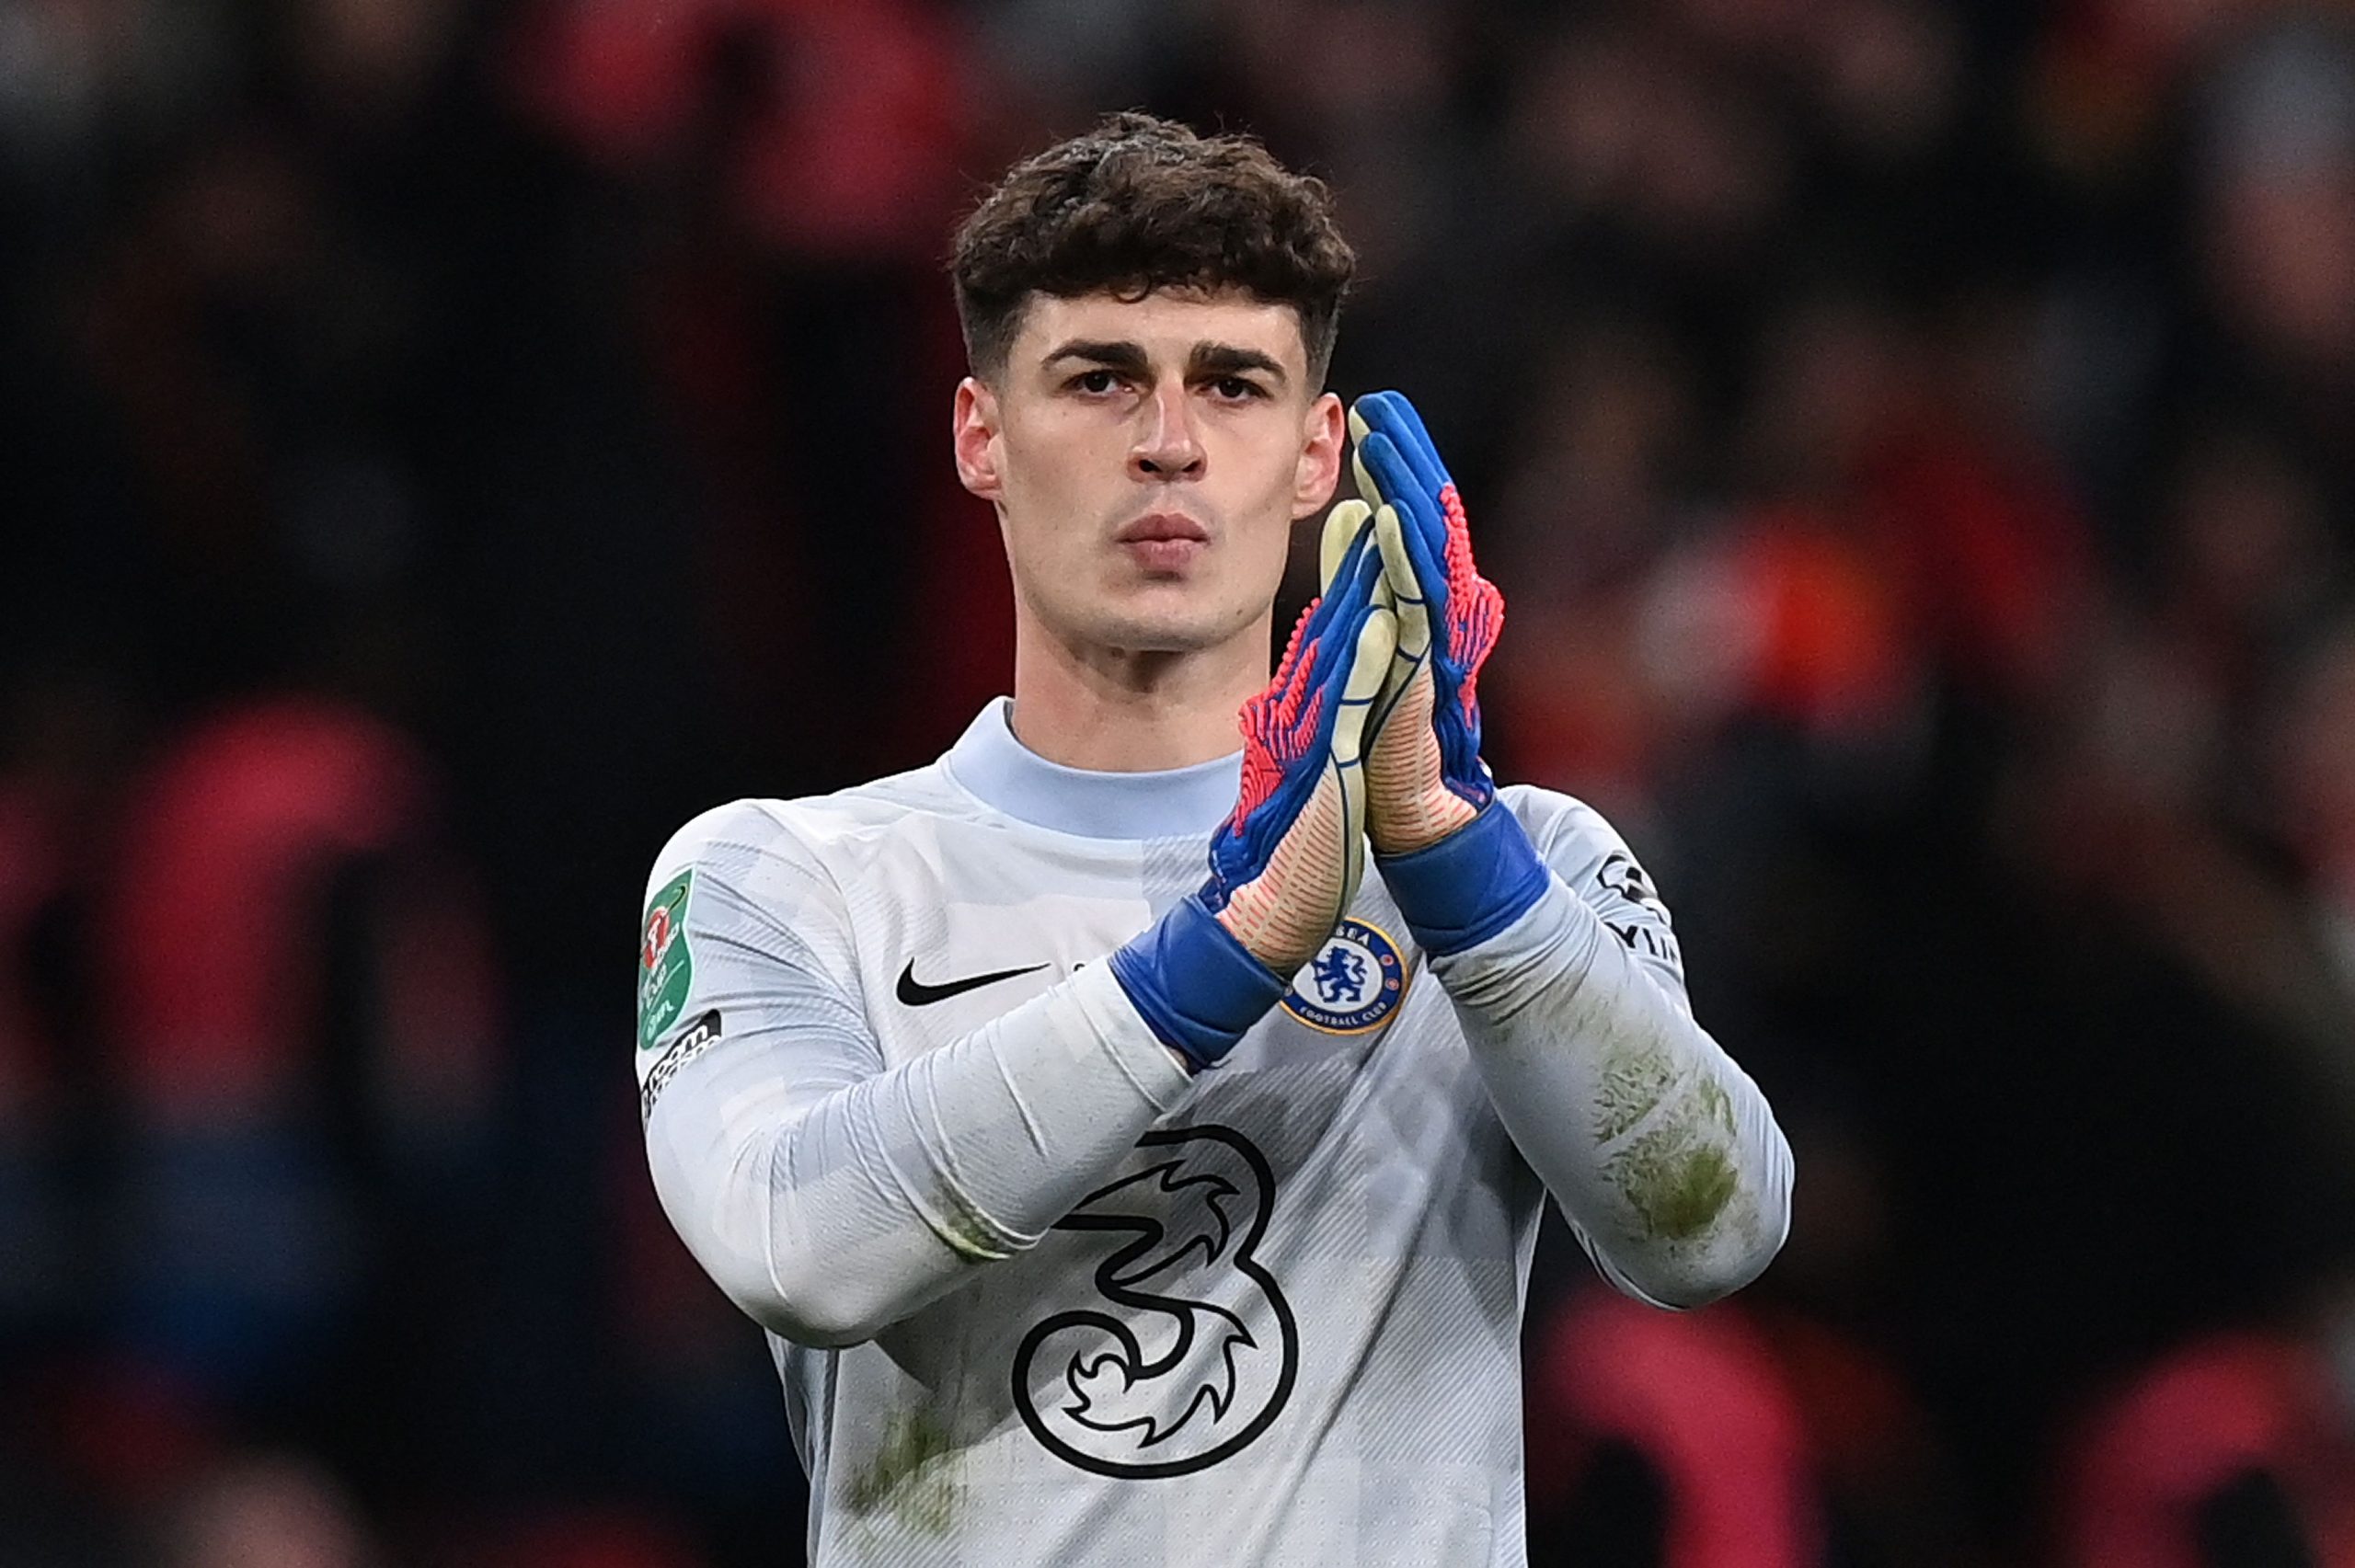 Real Madrid join Bayern Munich in the race for Chelsea star Kepa Arrizabalaga after the ACL injury to Thibaut Courtois.